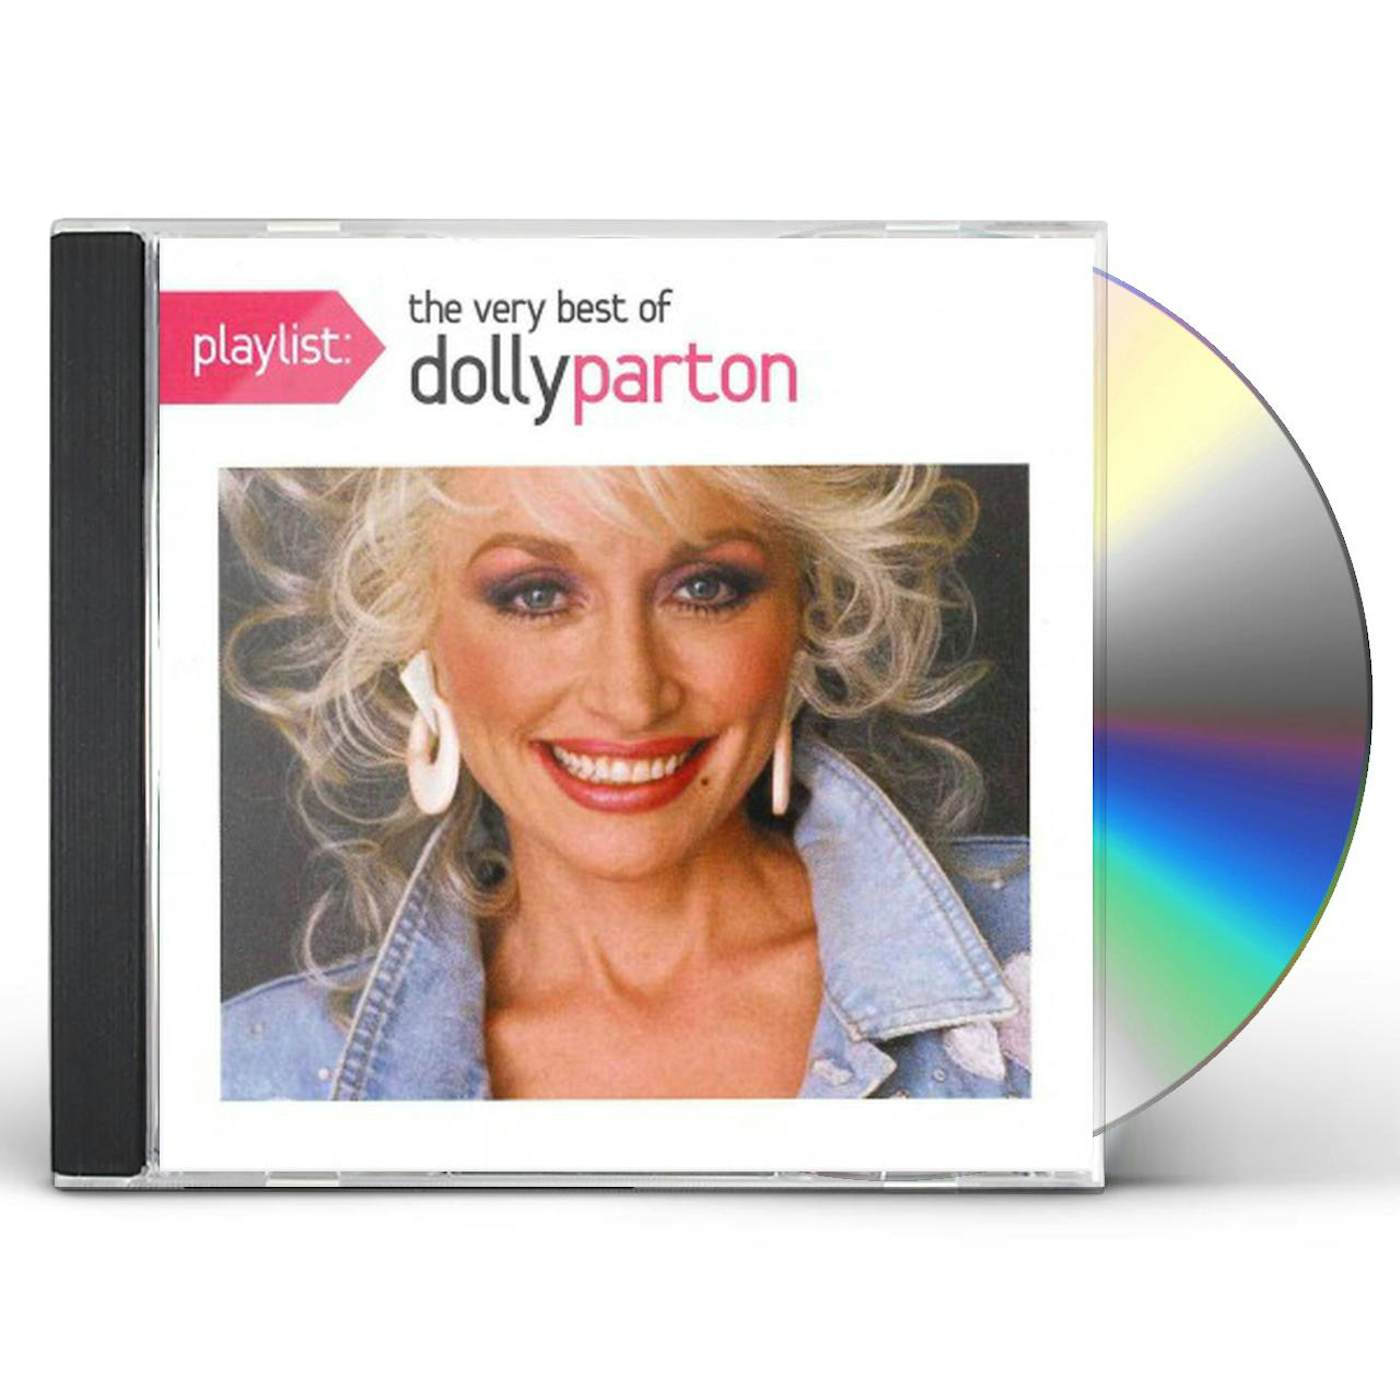 PLAYLIST: VERY BEST OF DOLLY PARTON CD